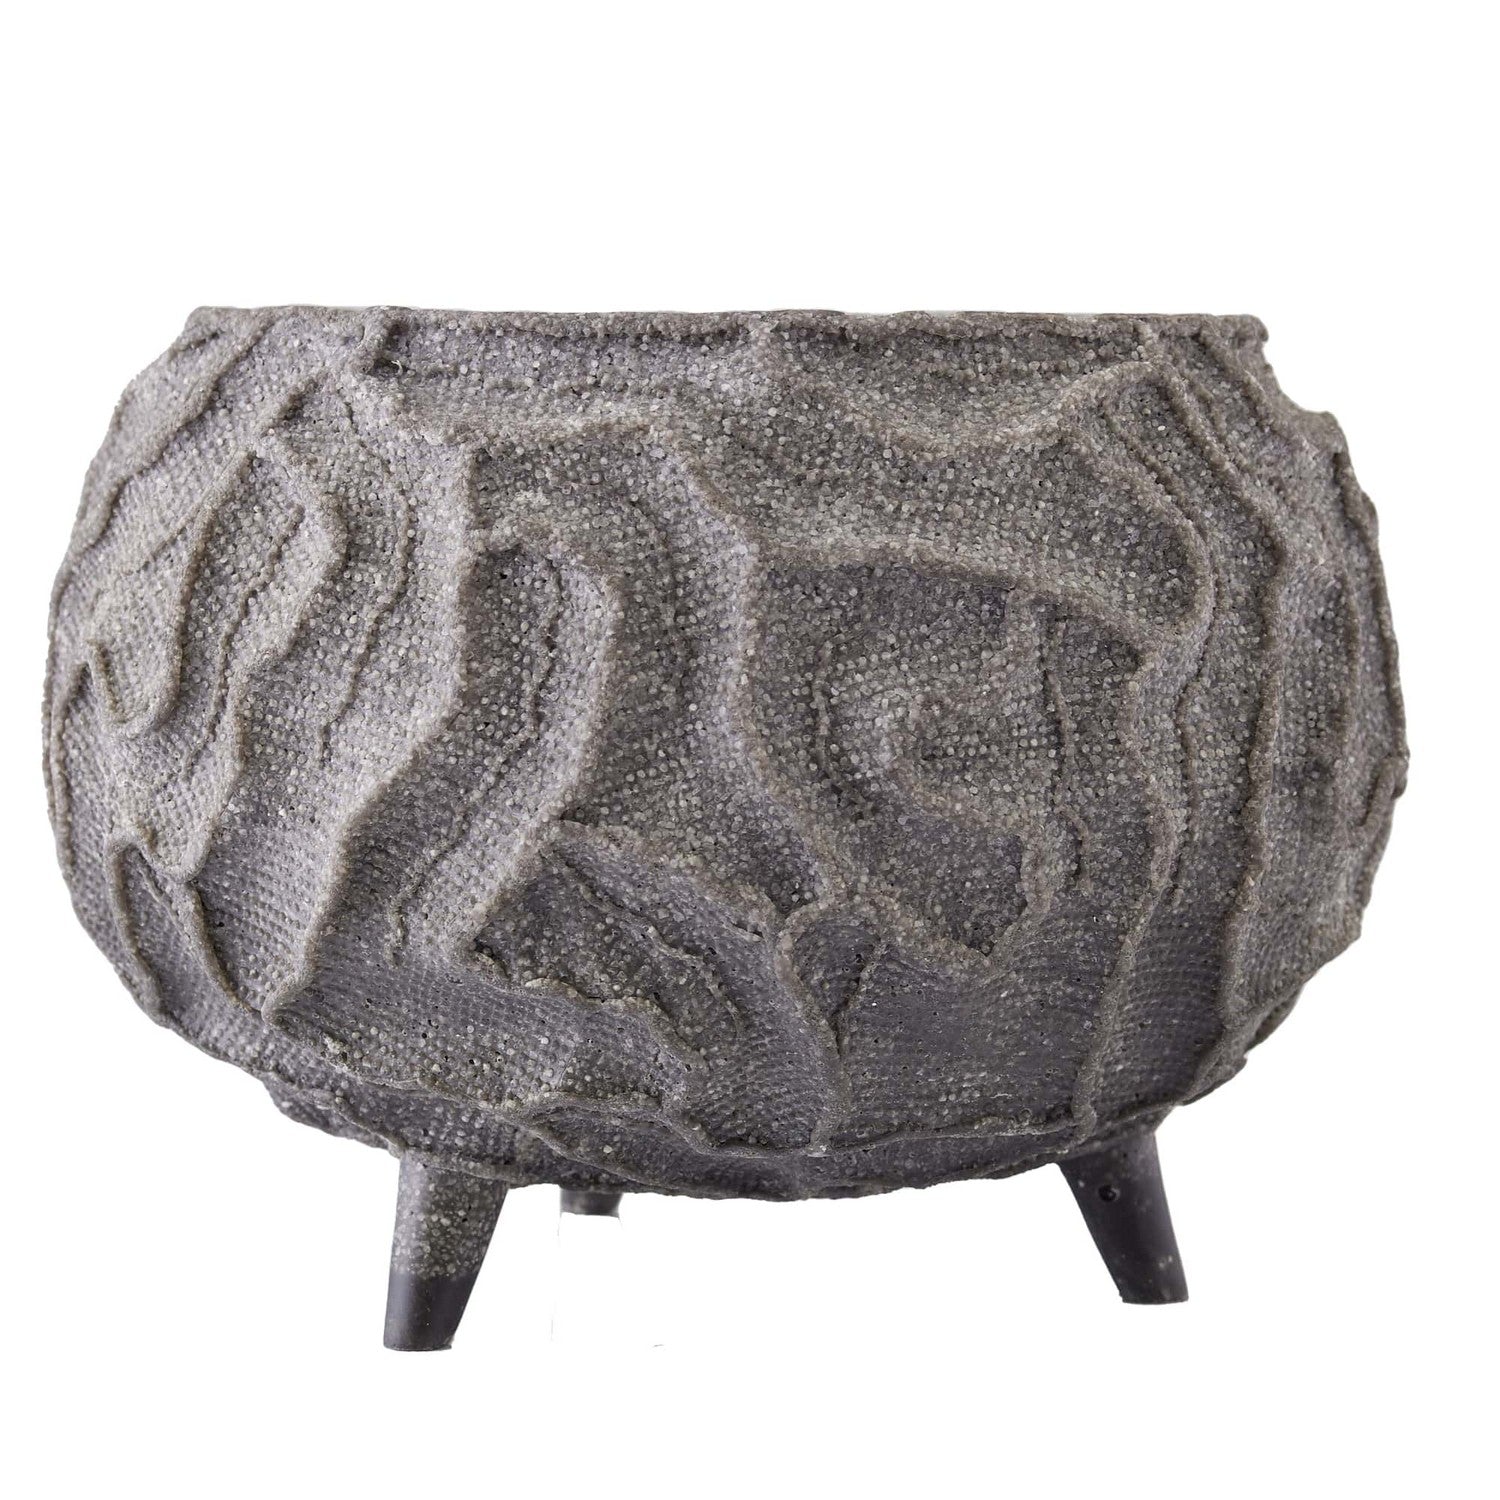 Planter from the Hyder collection in Graphite finish